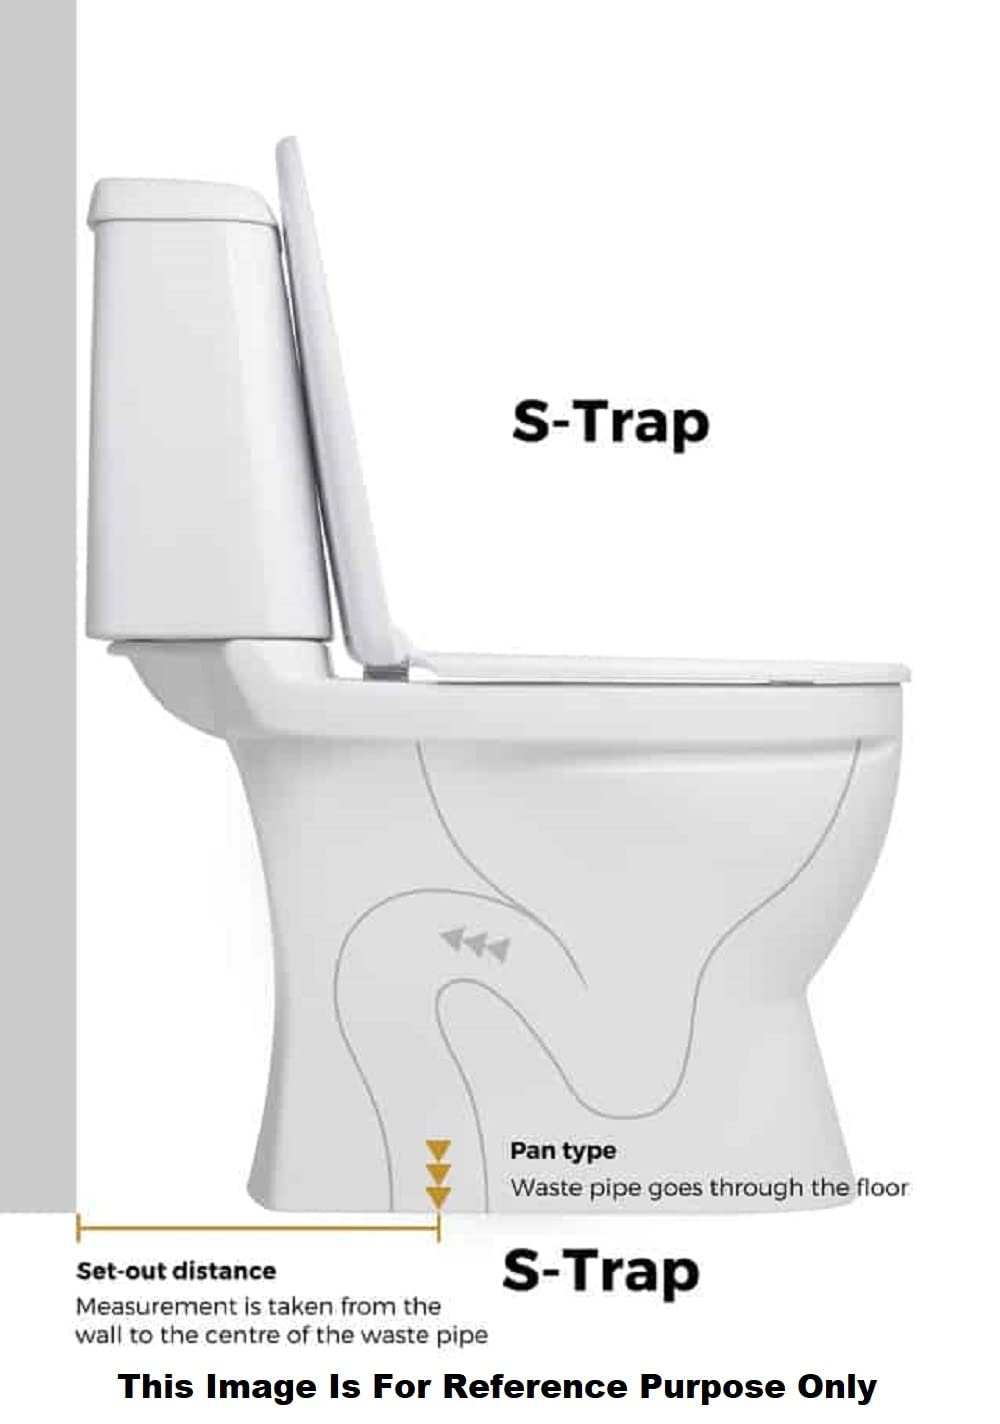 InArt Western Floor Mounted One Piece Water Closet European Ceramic Western Toilet Commode S-Trap Oval White Color - InArt-Studio